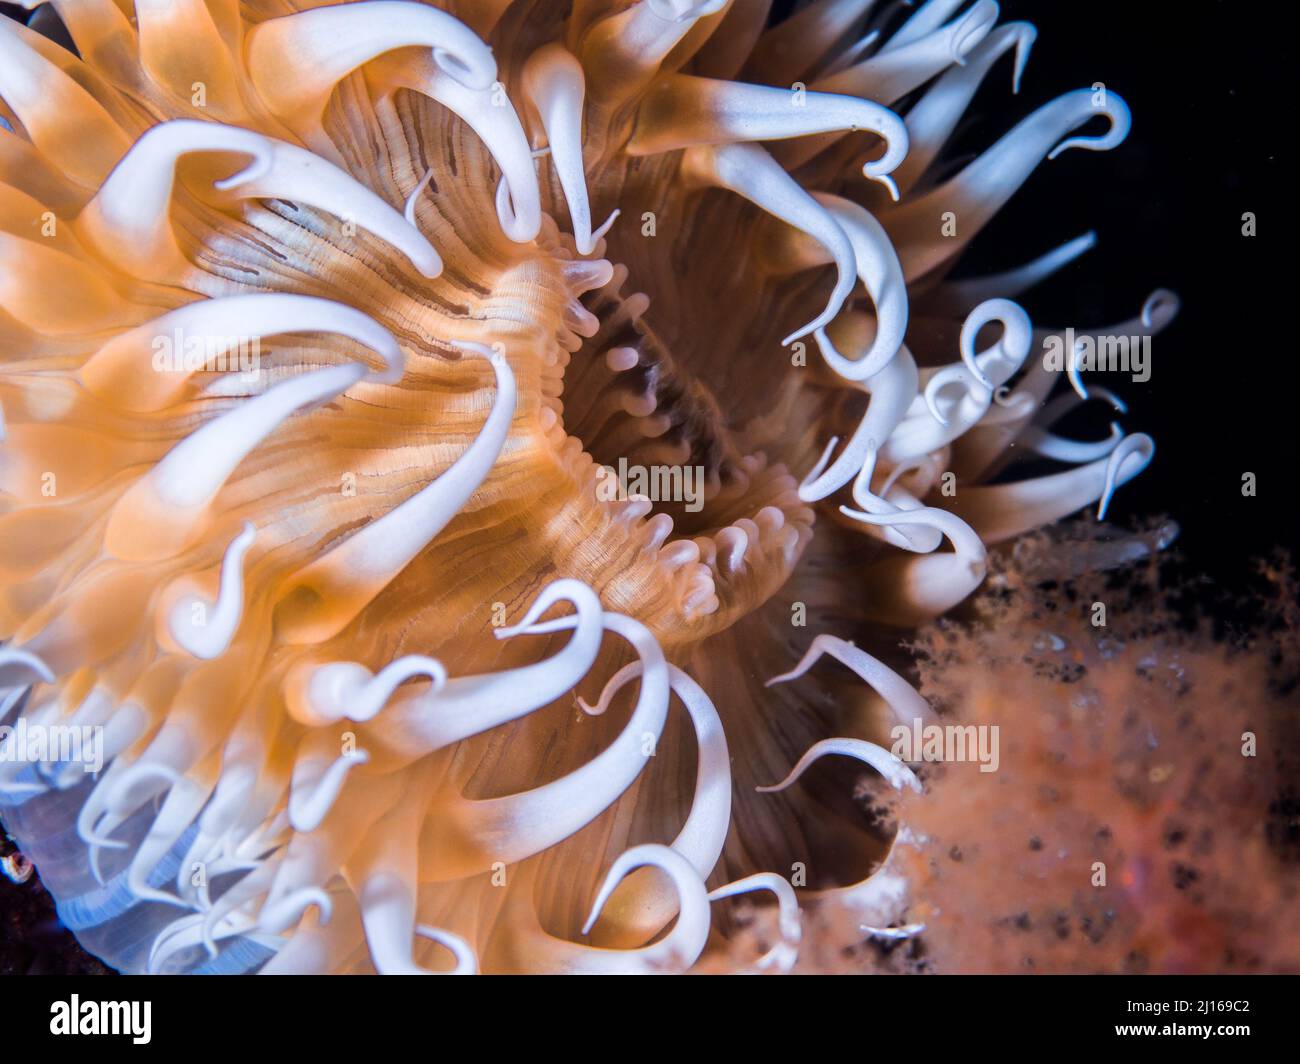 A macro picture of a Striped anemone underwater with a light yellow body and white tentacles Stock Photo